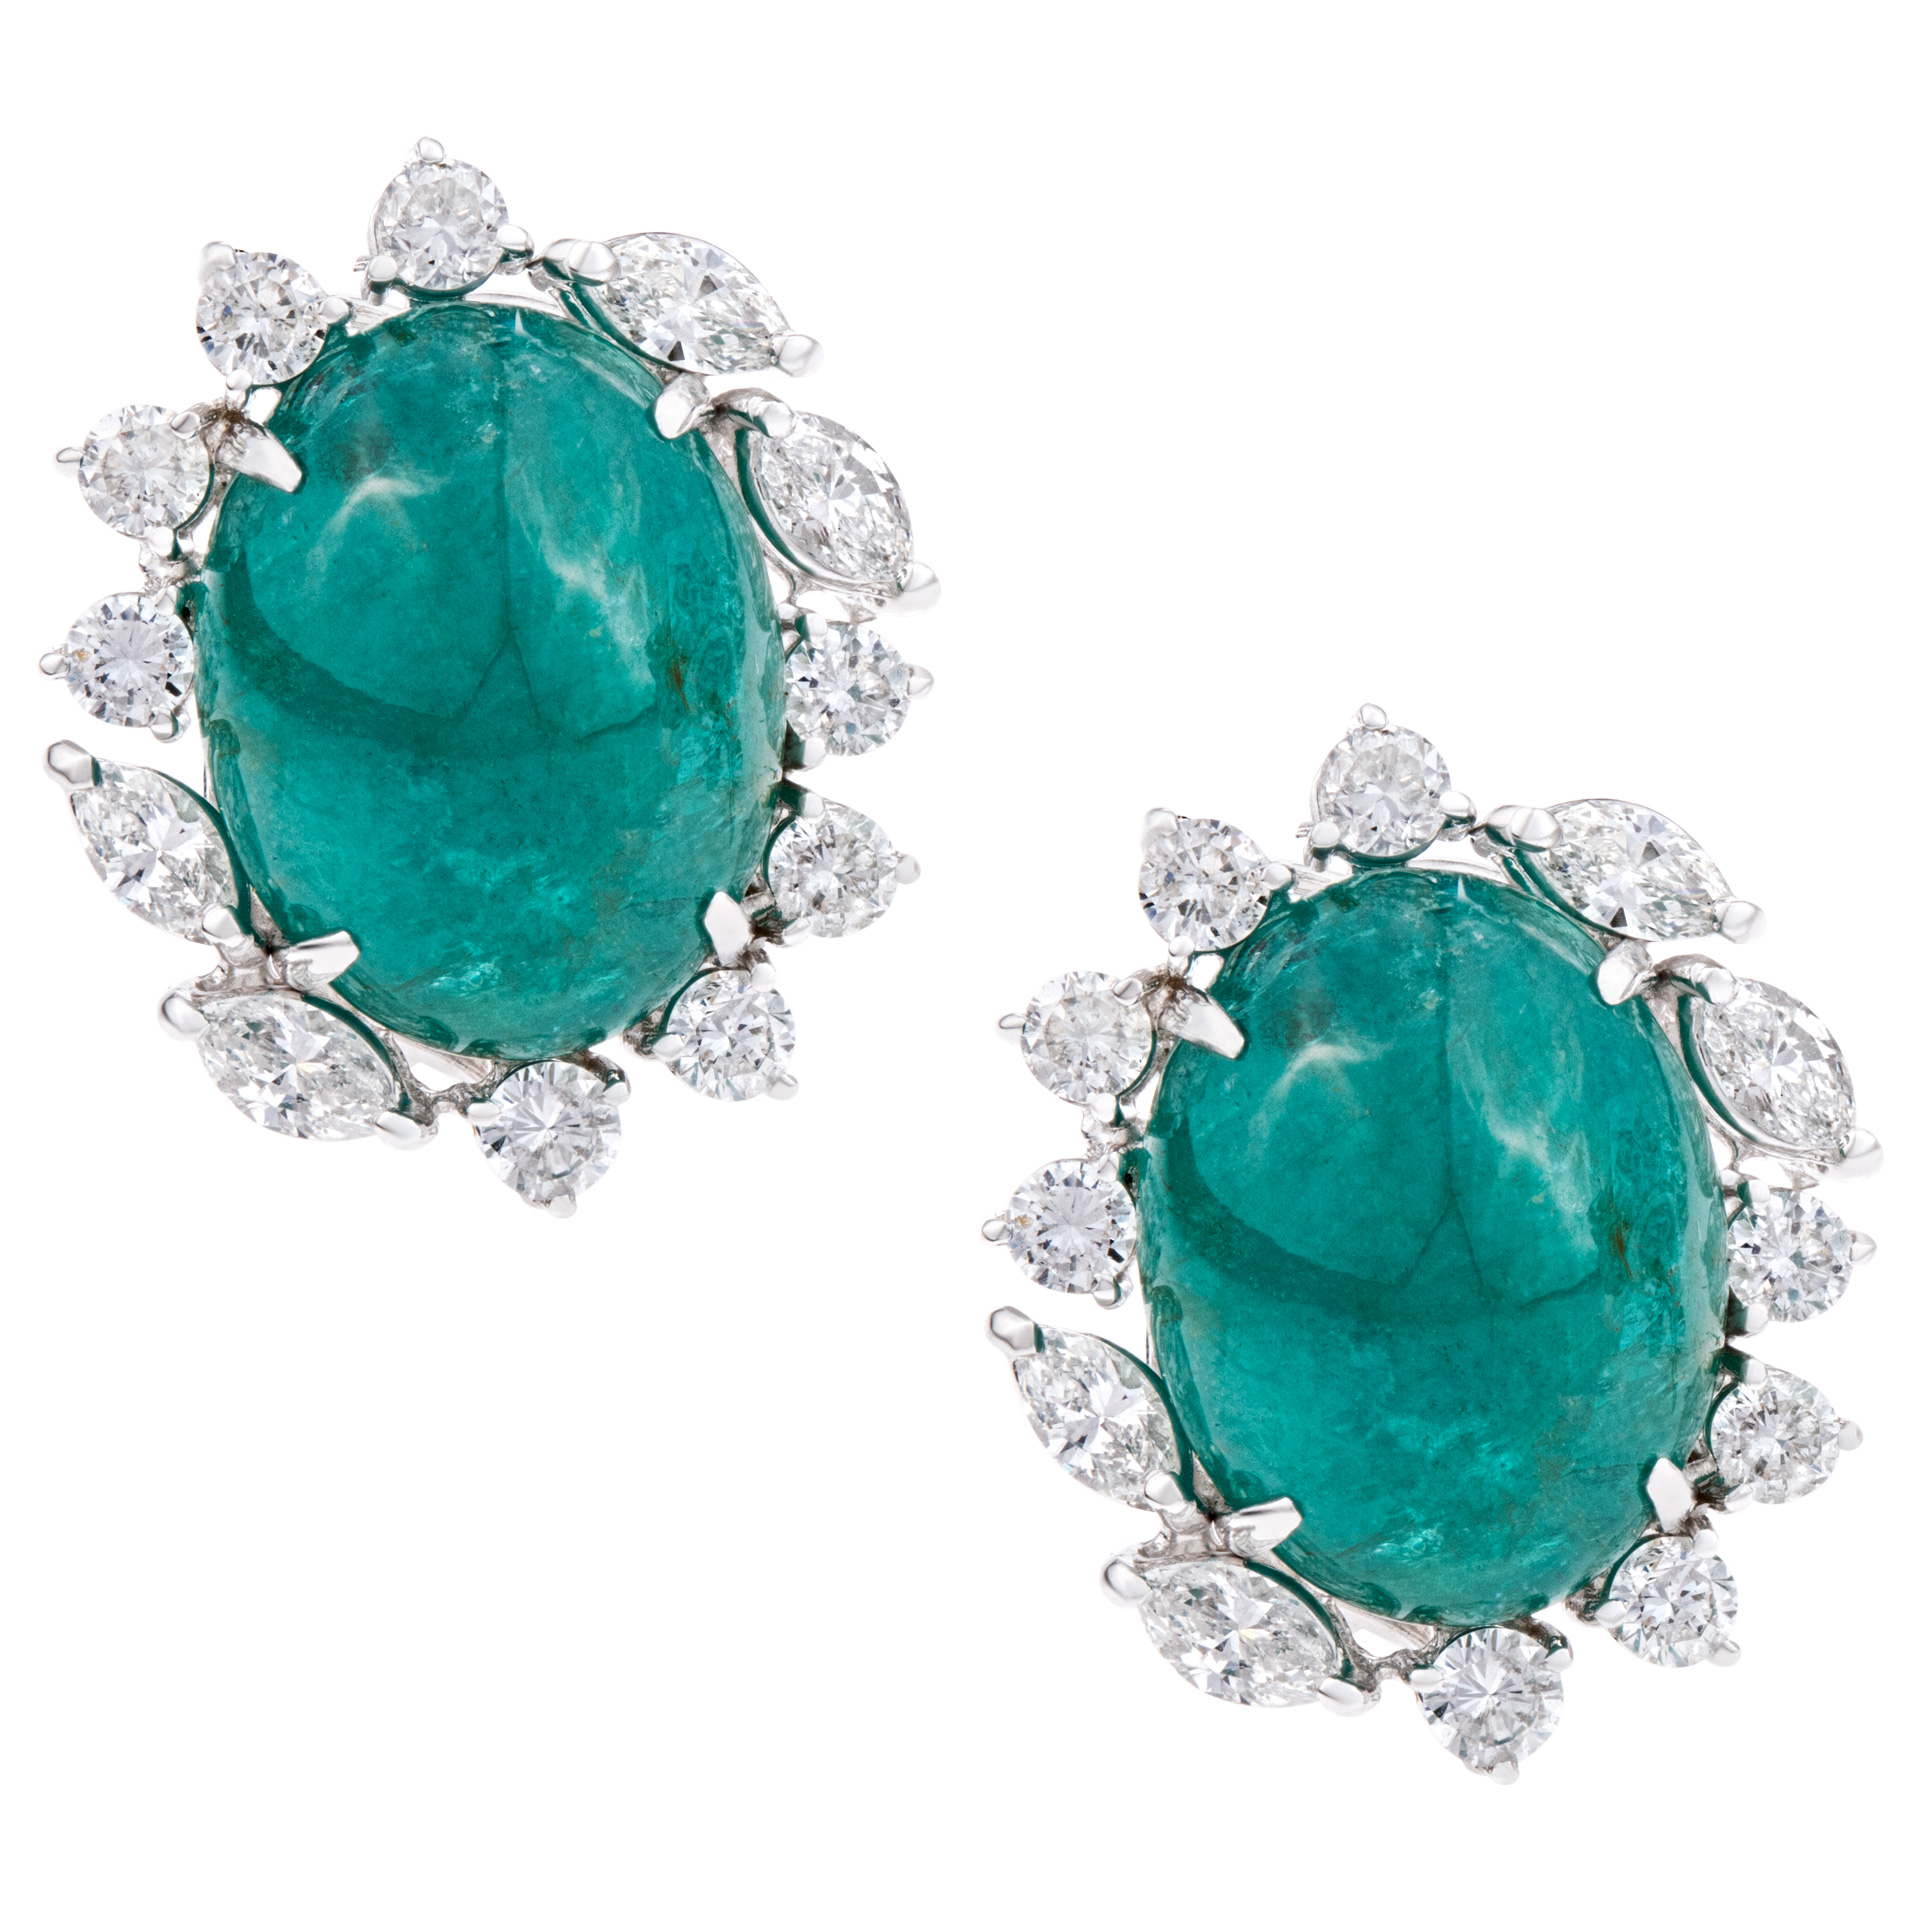 Stunning Emerald and diamond earrings in 18k white gold